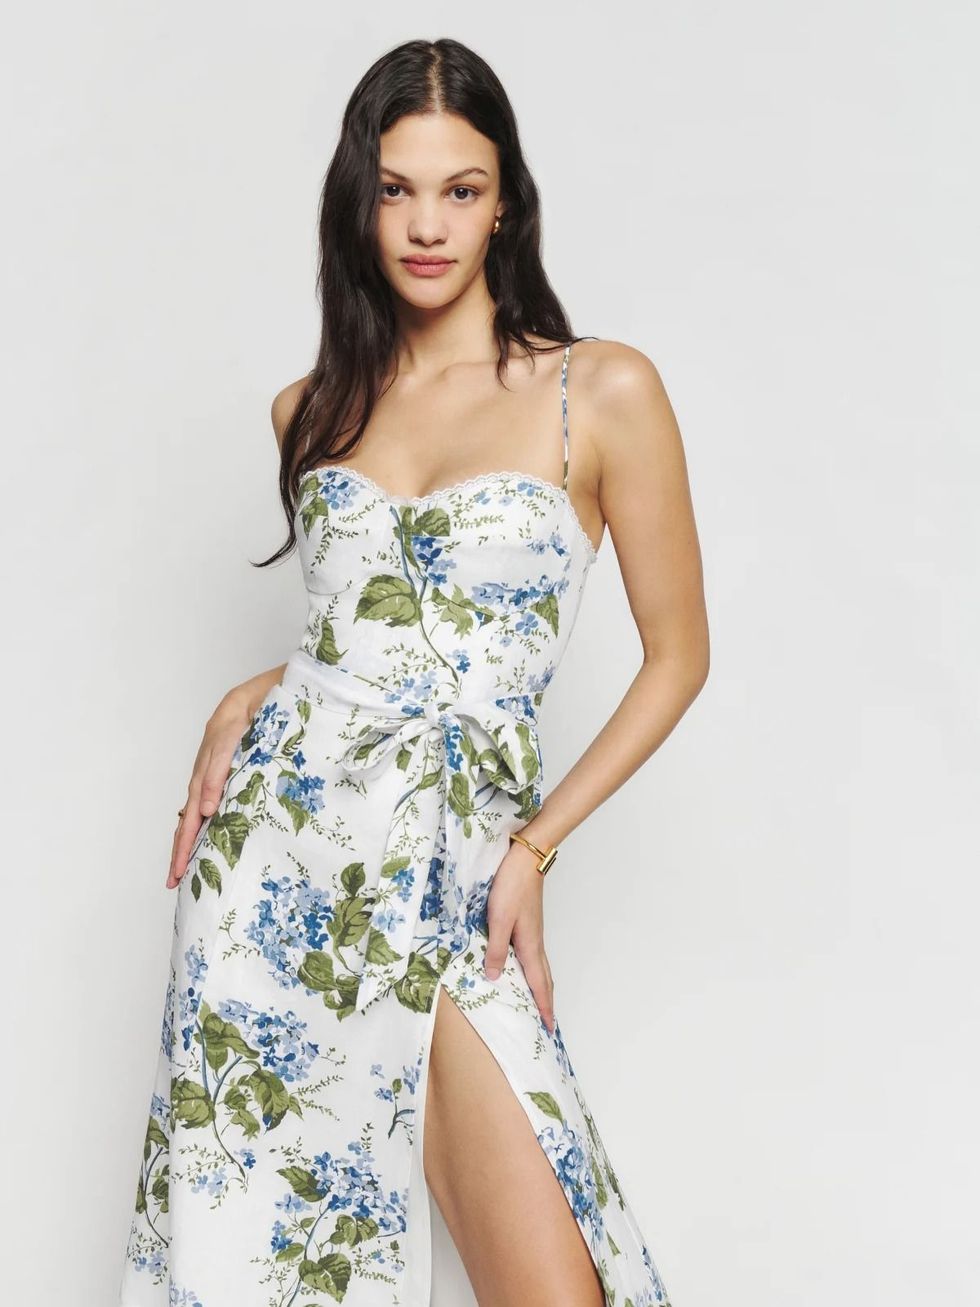 Reformation Sale UK: 17 Discounted Reformation Dresses And More